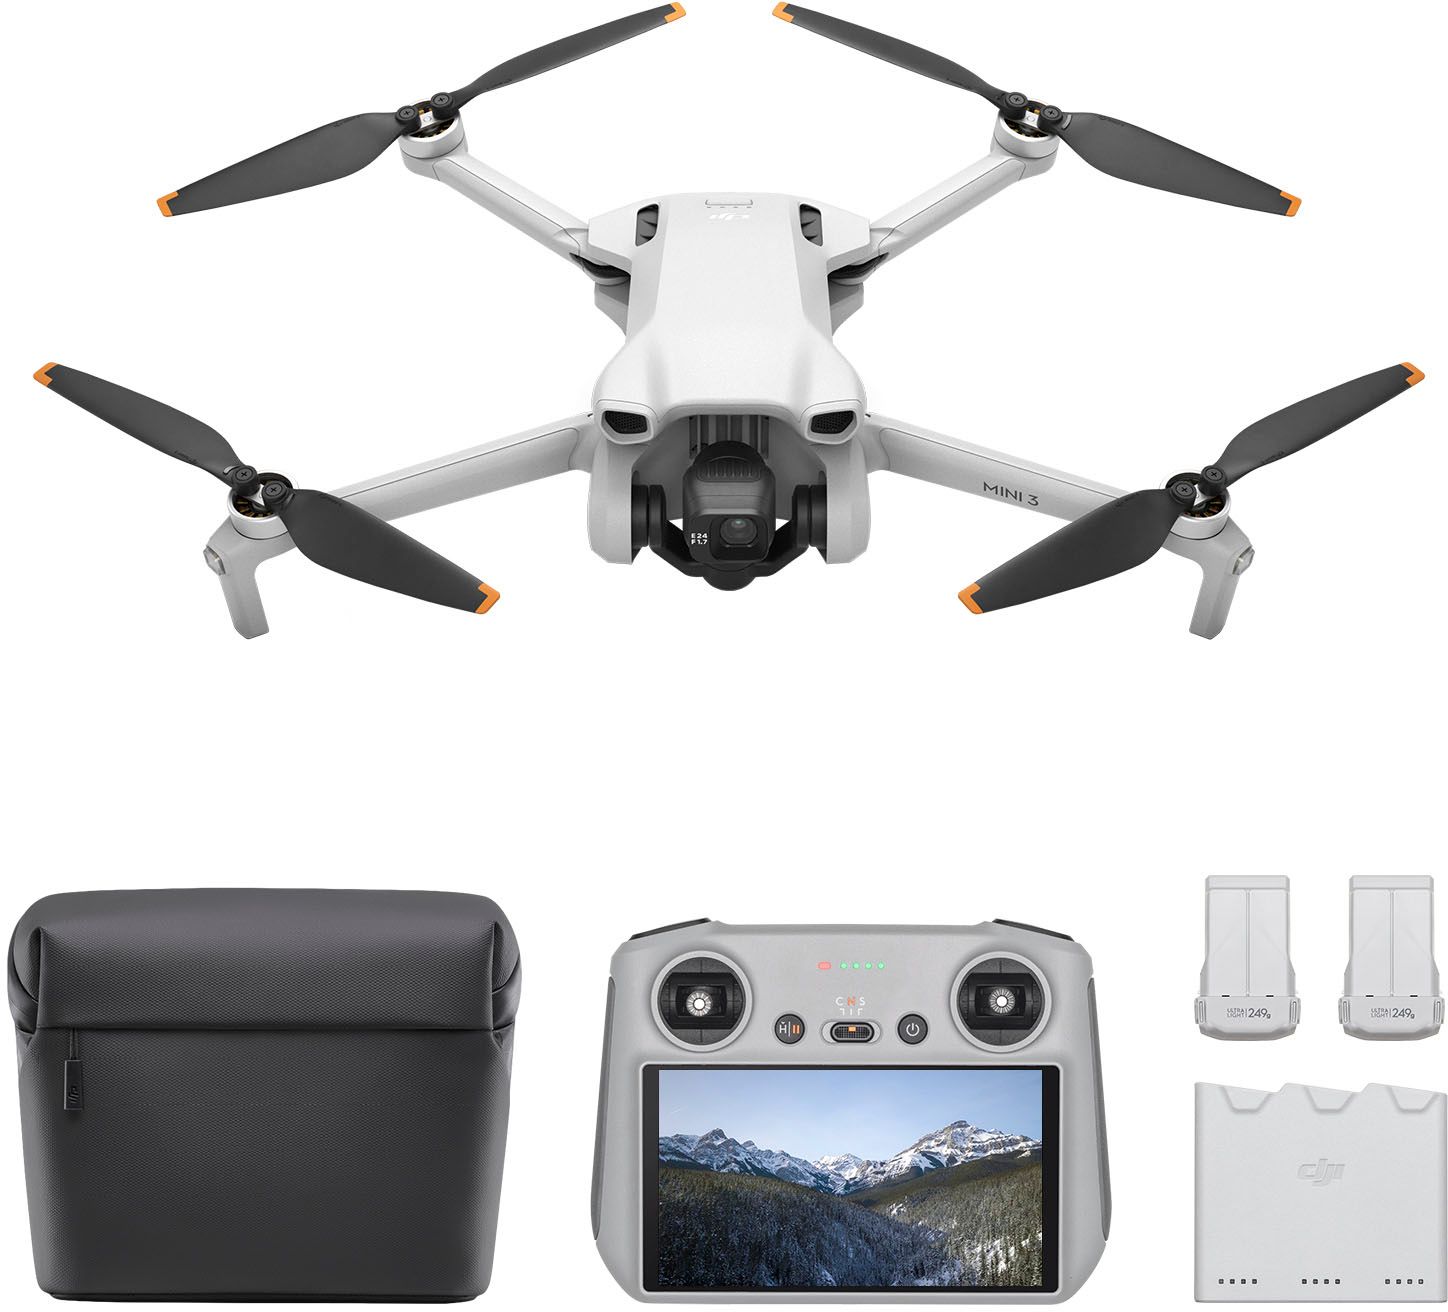 DJI Mini 3 Fly More Combo Drone and Remote Control with Built-in Screen